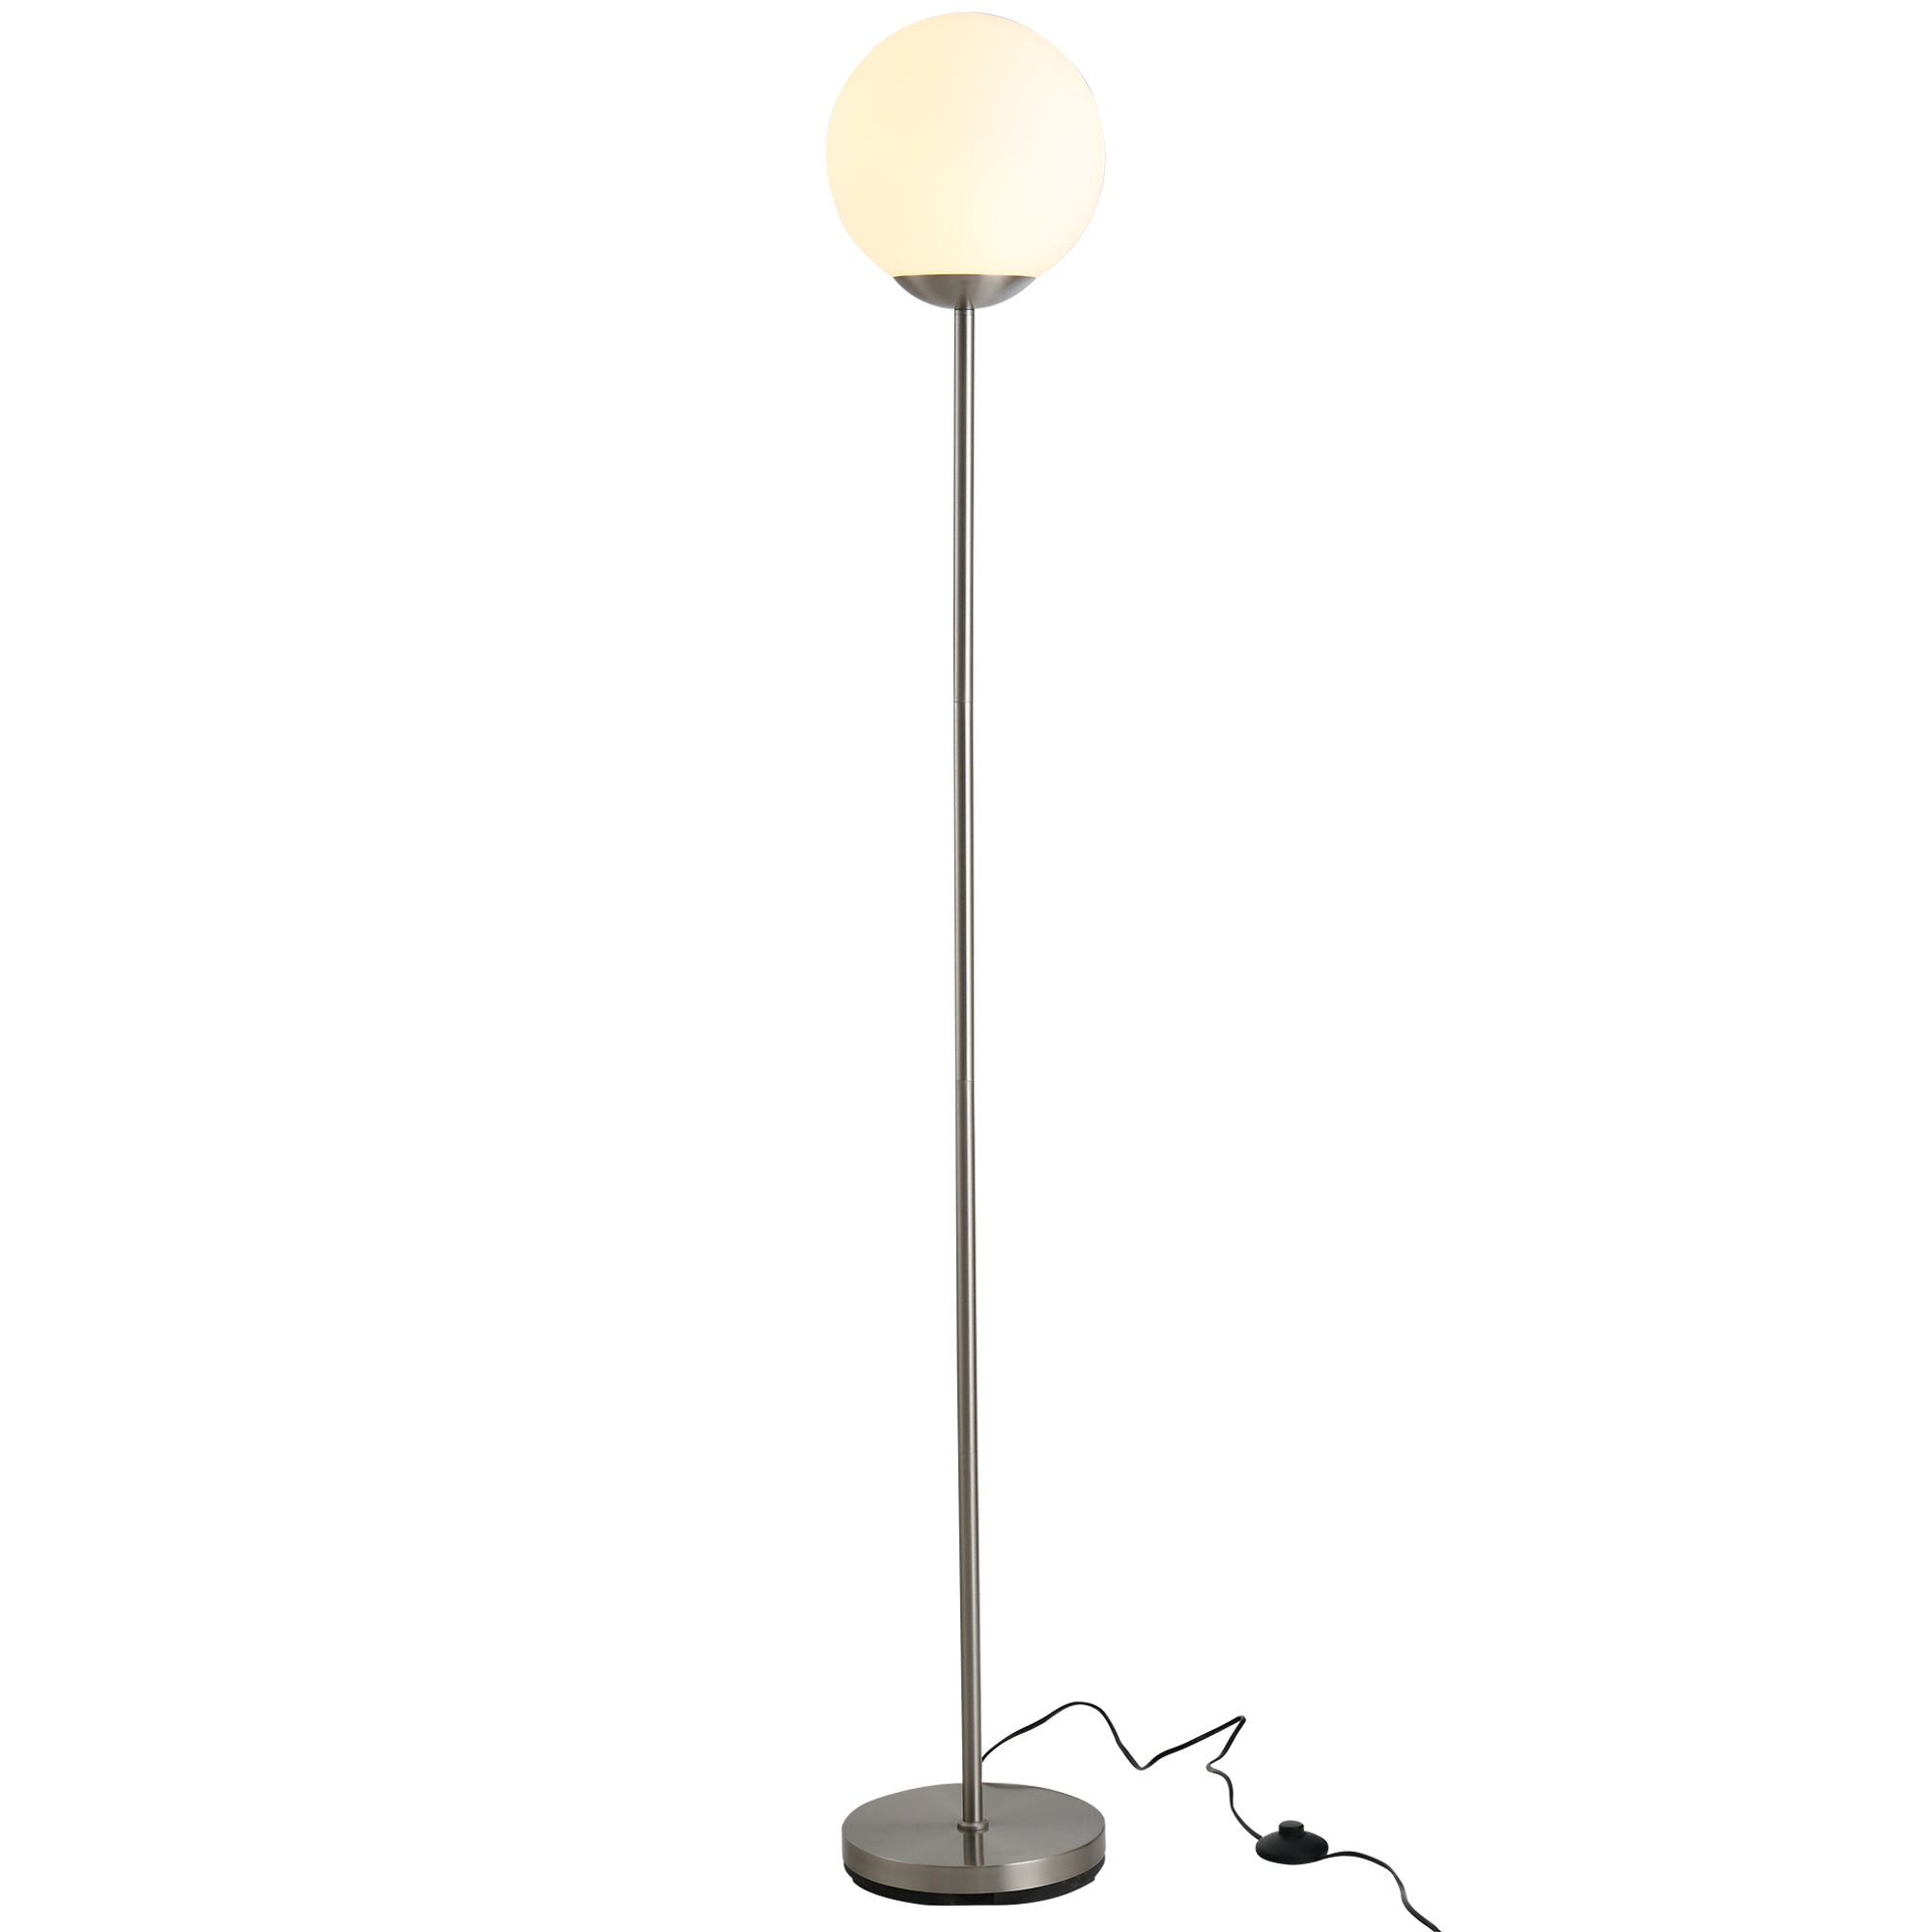 171cm Glass Globe Floor Lamp Metal Frame Sphere Light Pedal Switch Home Office Living Room Modern Unique Standing Beautiful Furnishing - Grey  AOSOM   